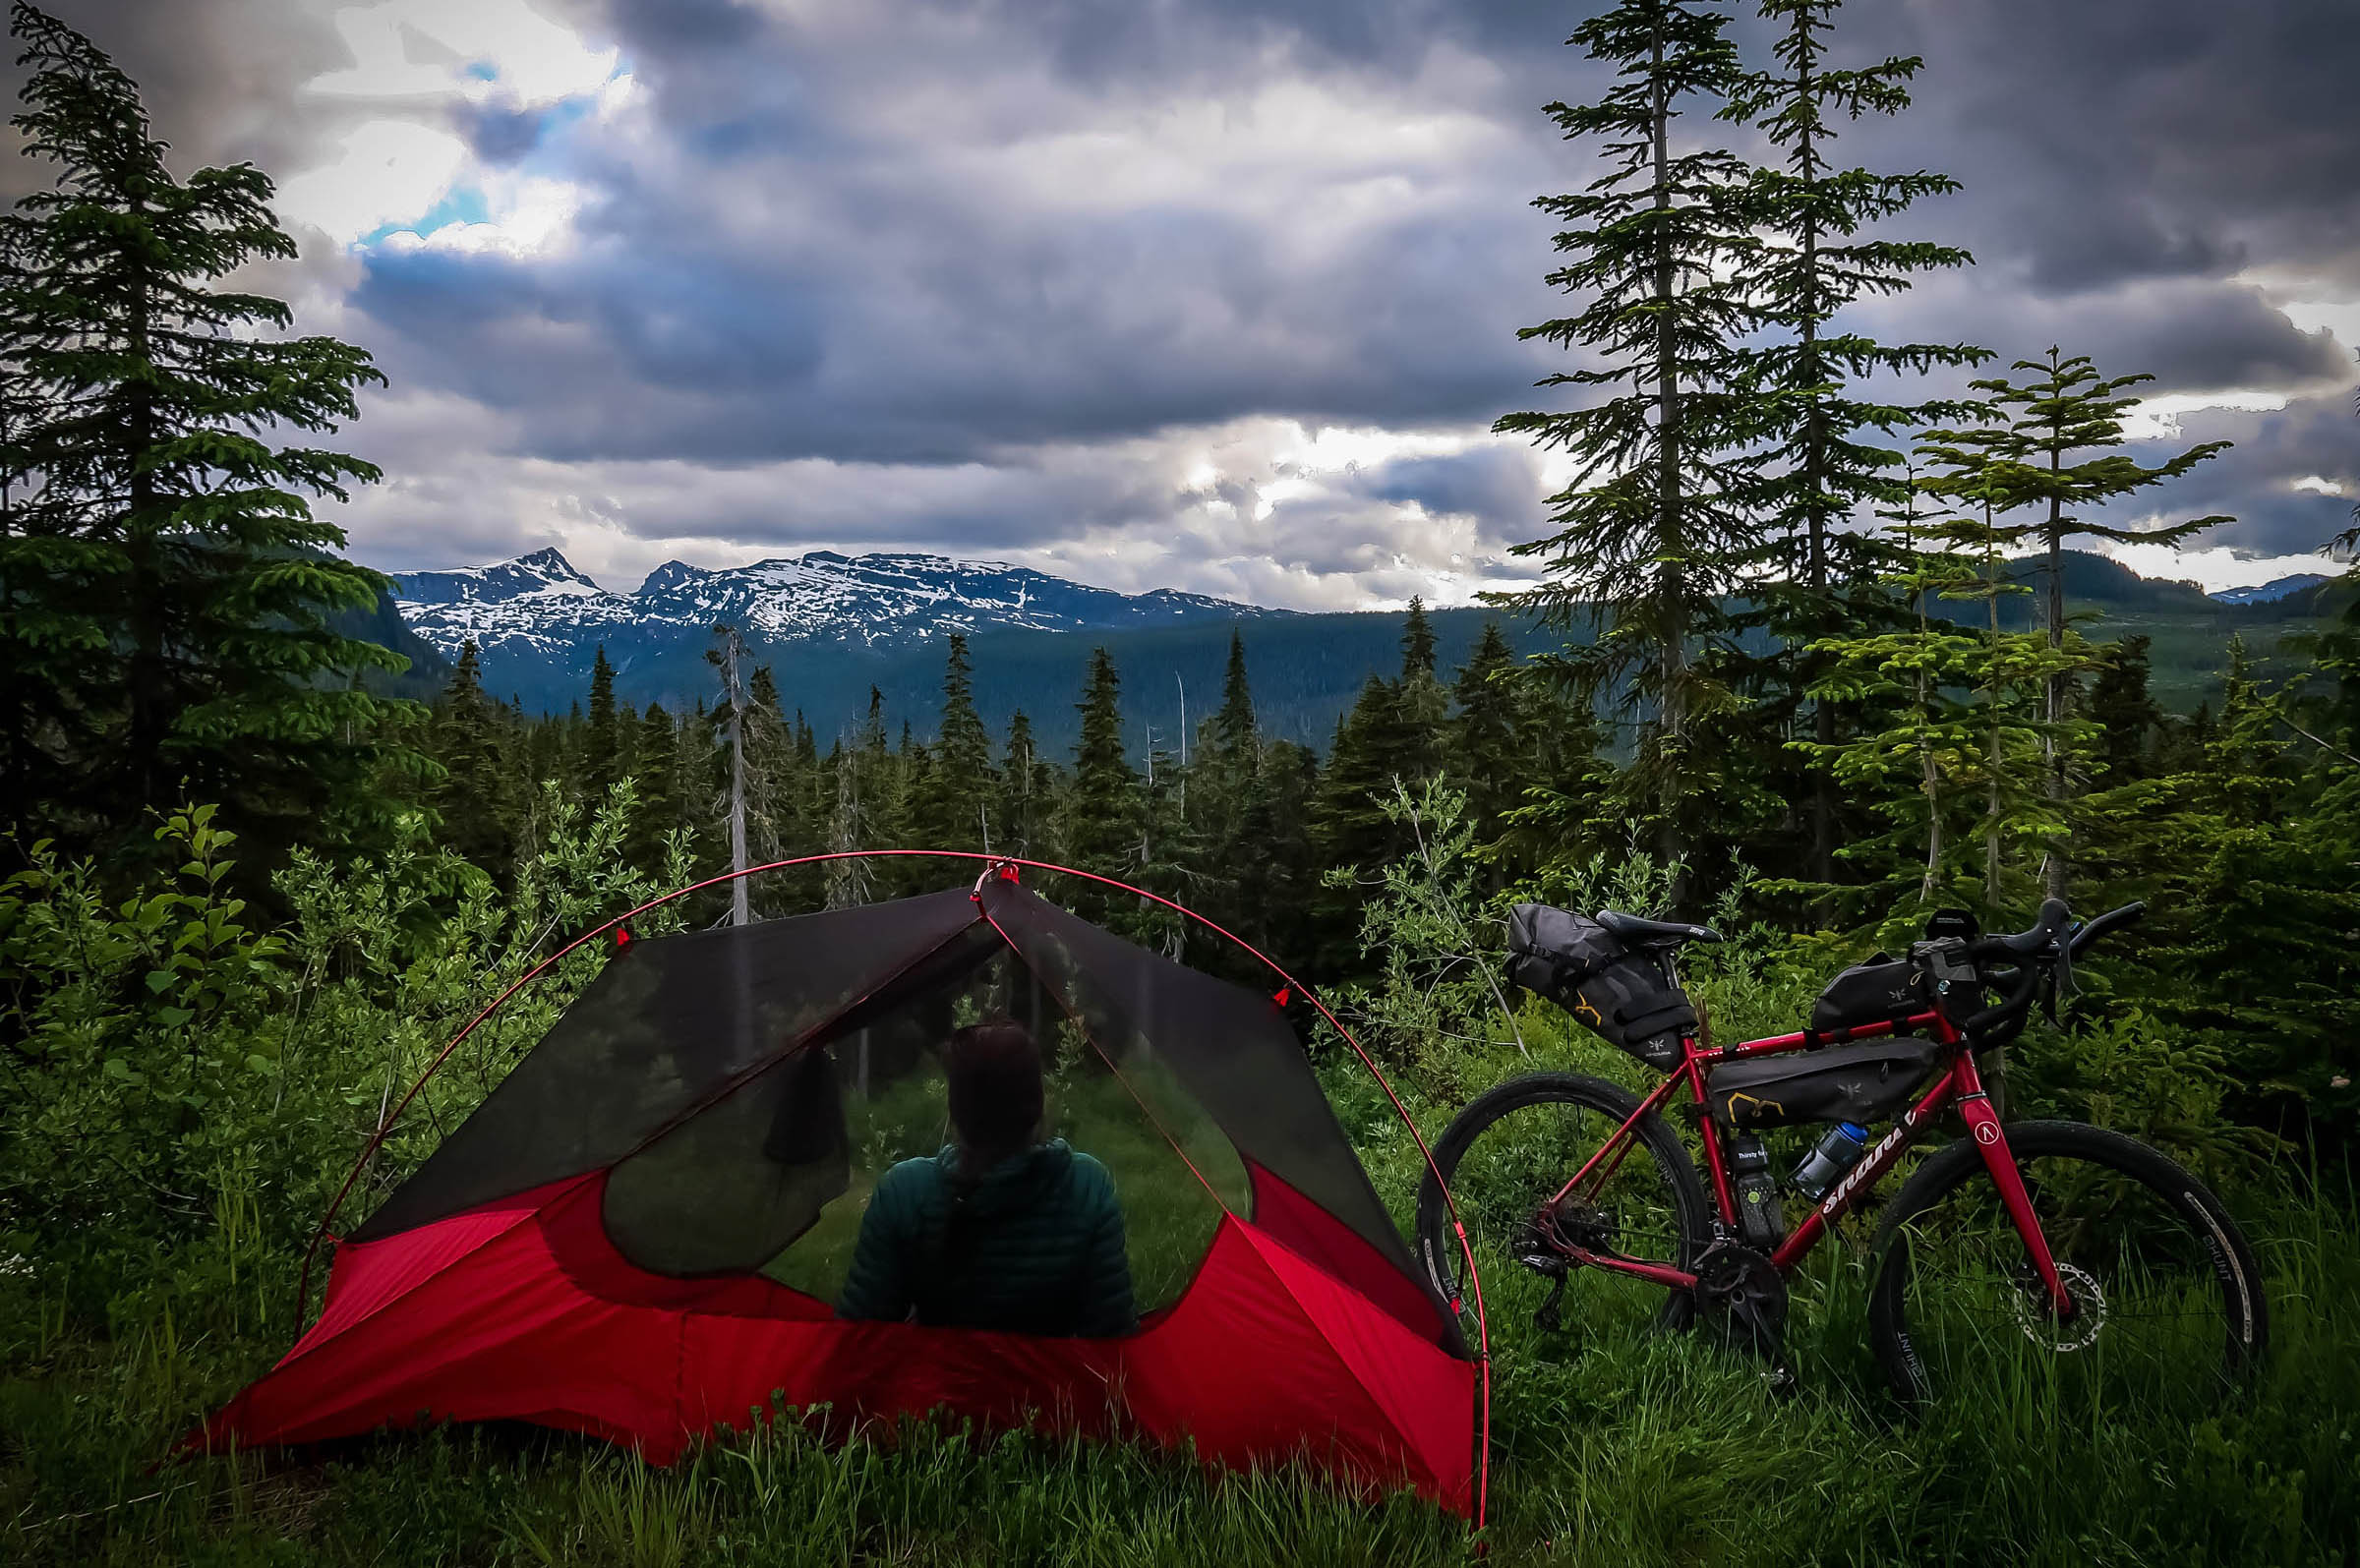 Bikepacking Vancouver Island by Jenny Tough